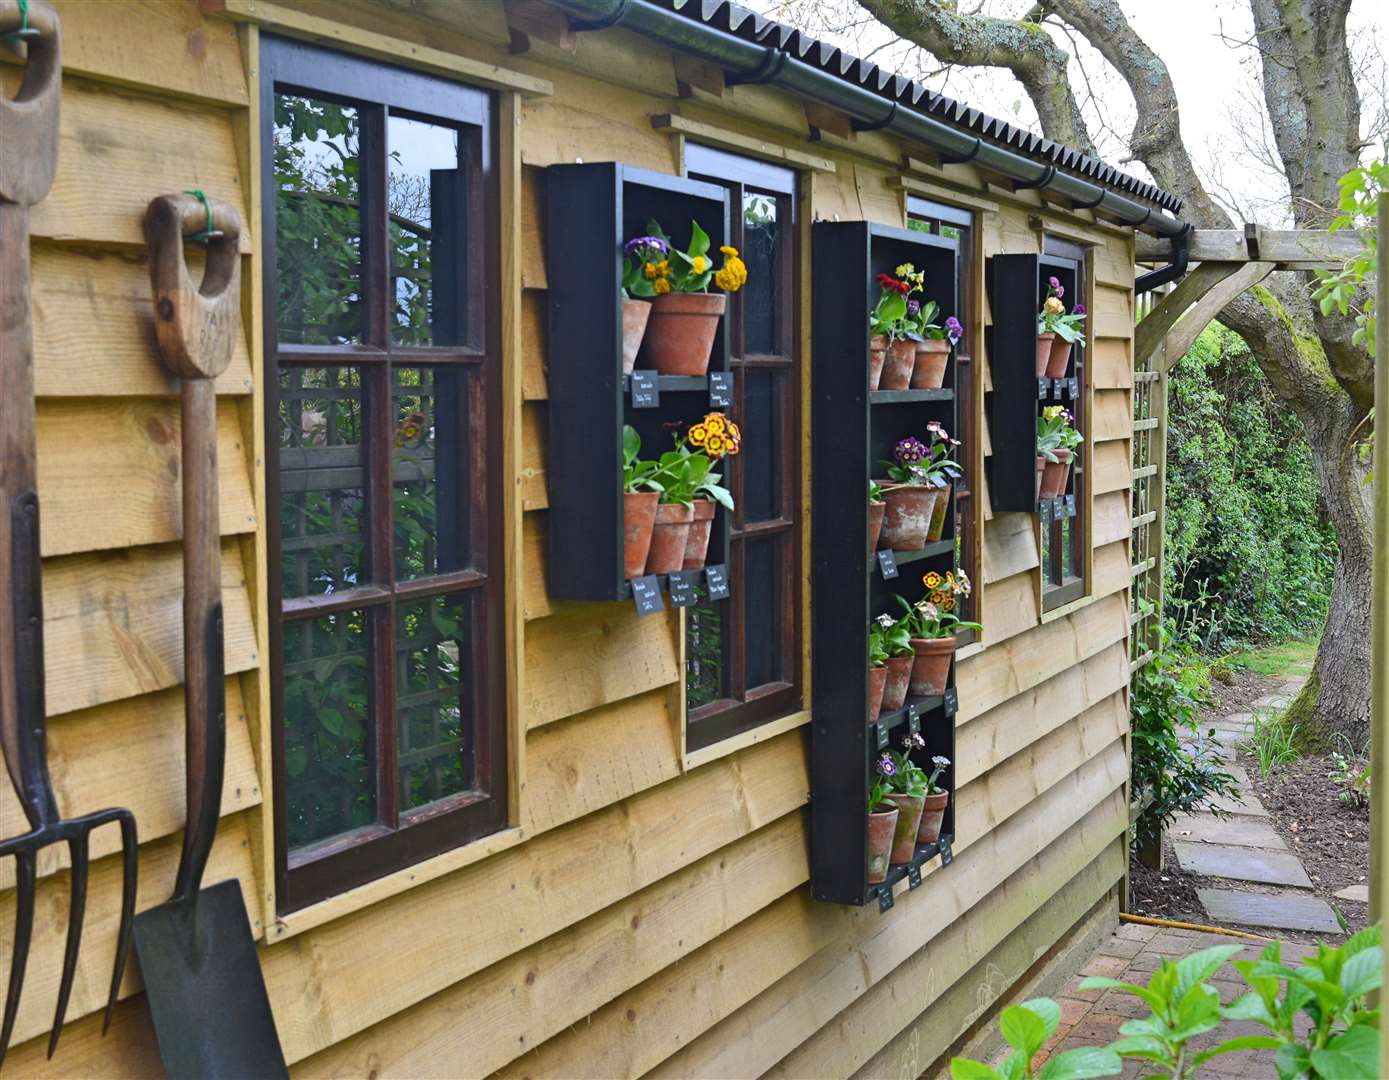 Find new plants and flowers to inspire your own gardening hobbies at Oak Cottage and Swallowfields Nursery. Picture: National Garden Scheme